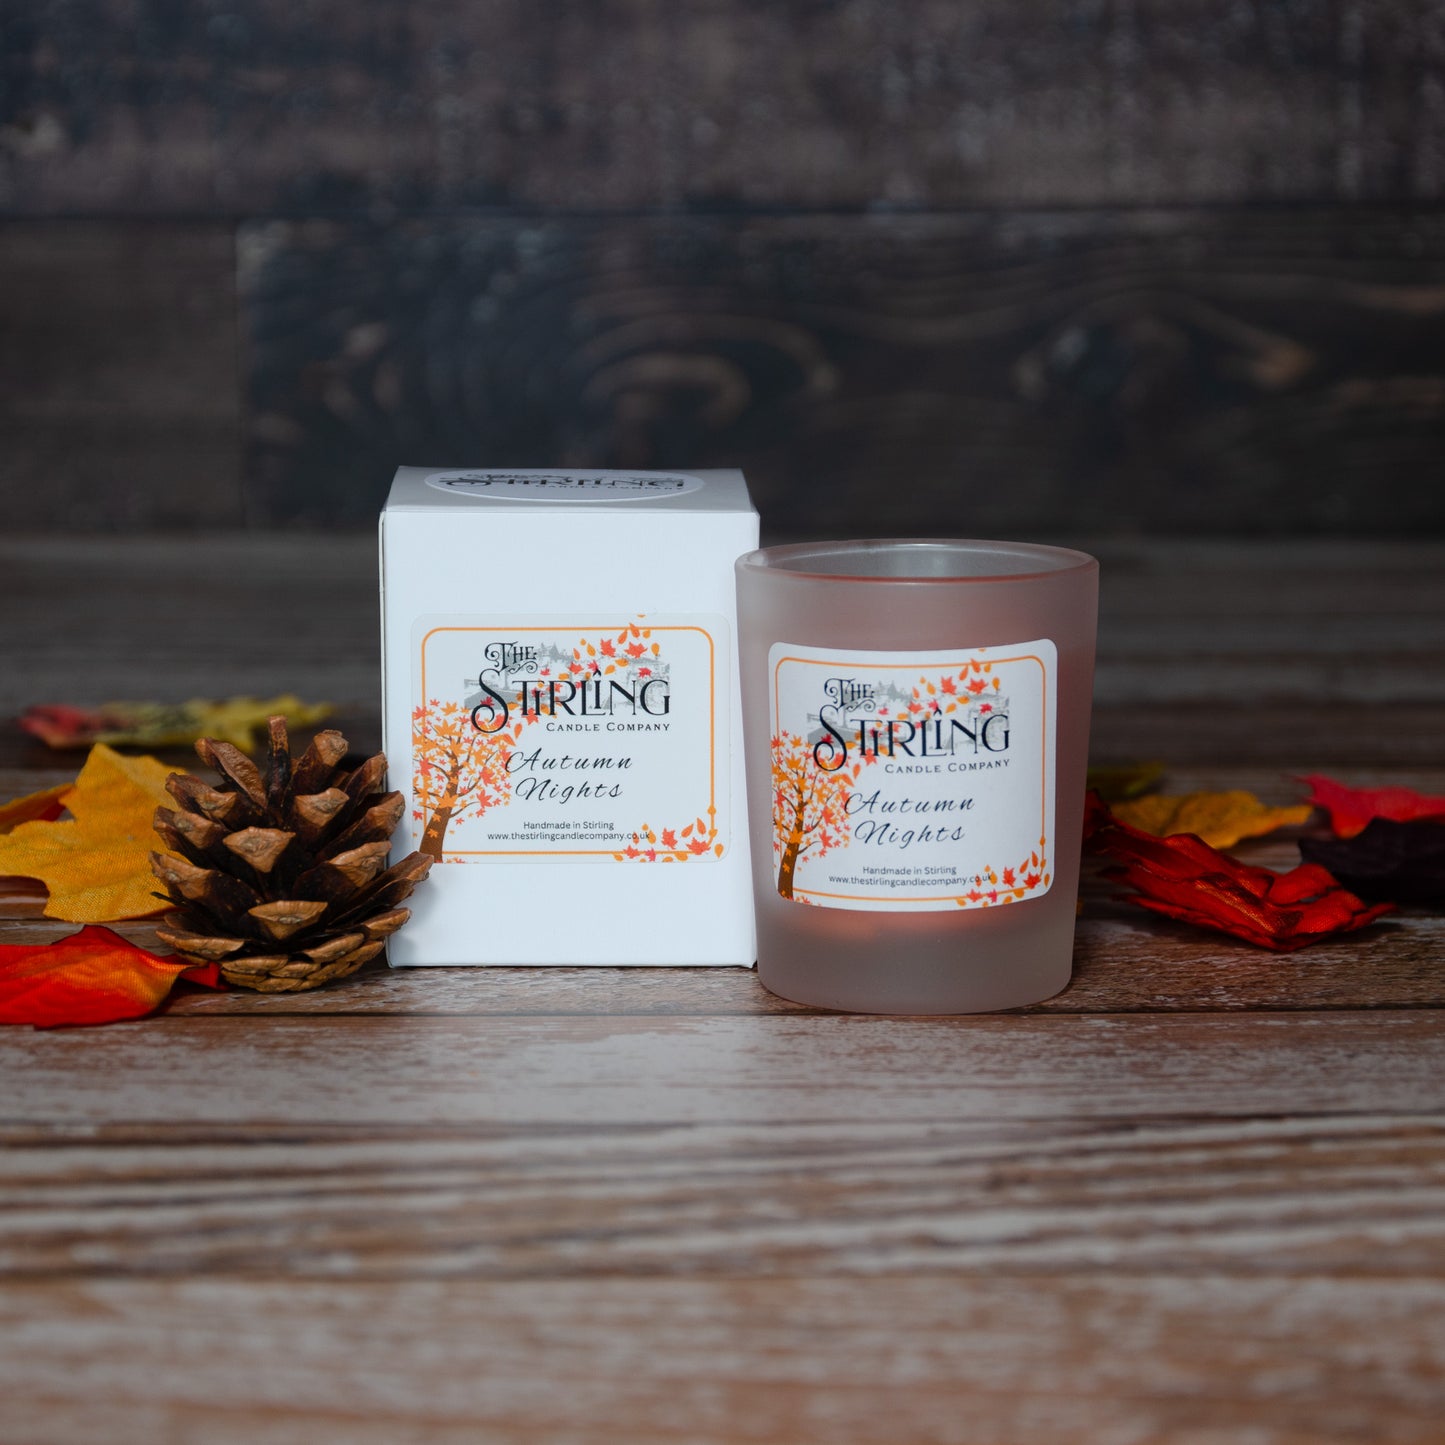 Autumn Nights small candle